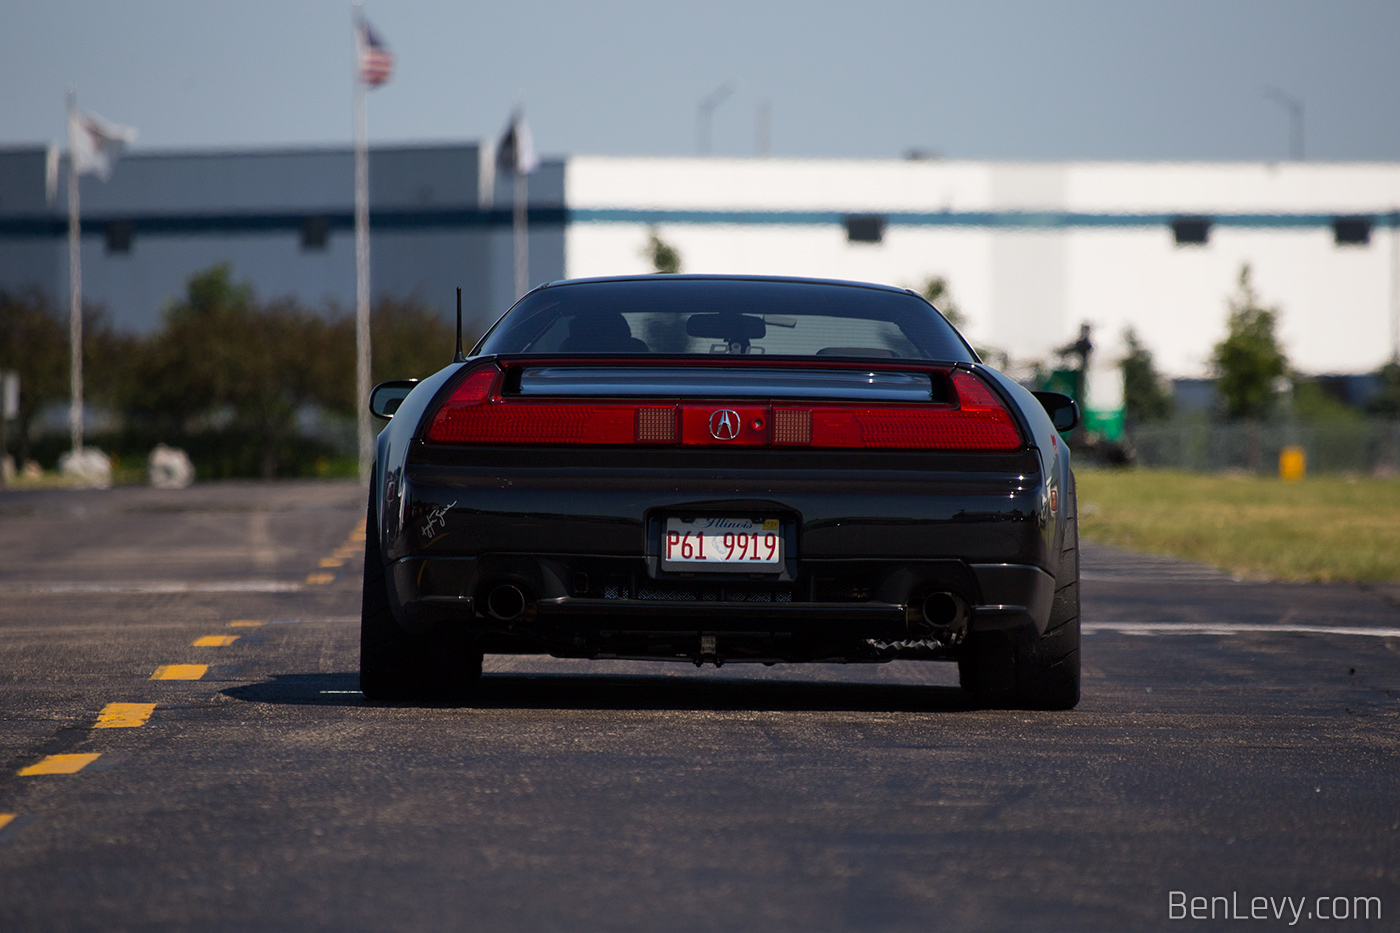 Rear of a black Acura NSX on a hot track day